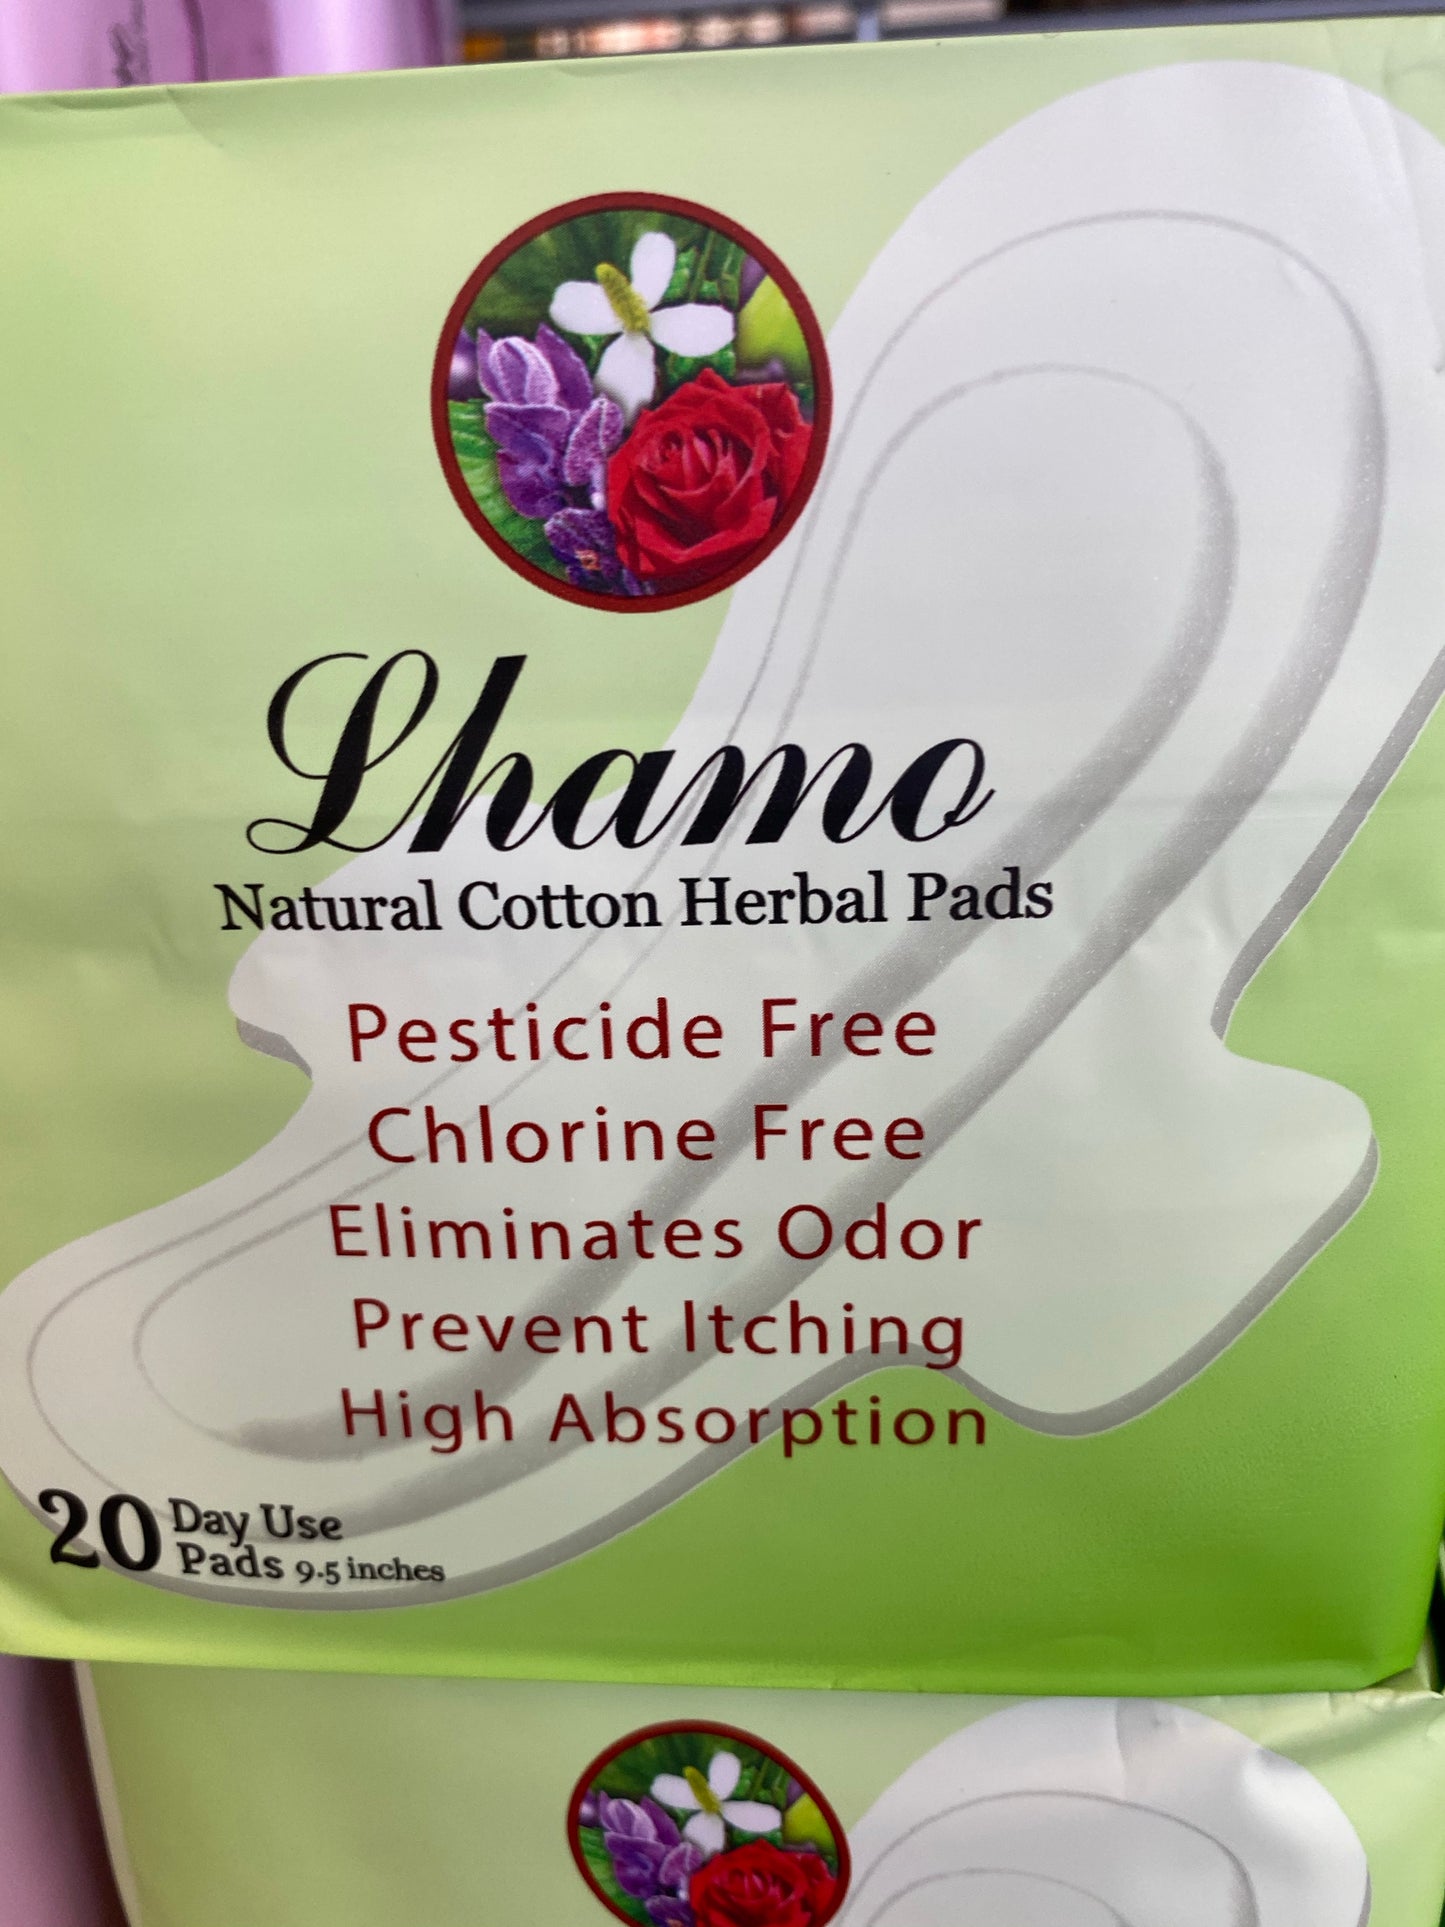 Herbal Pads for women